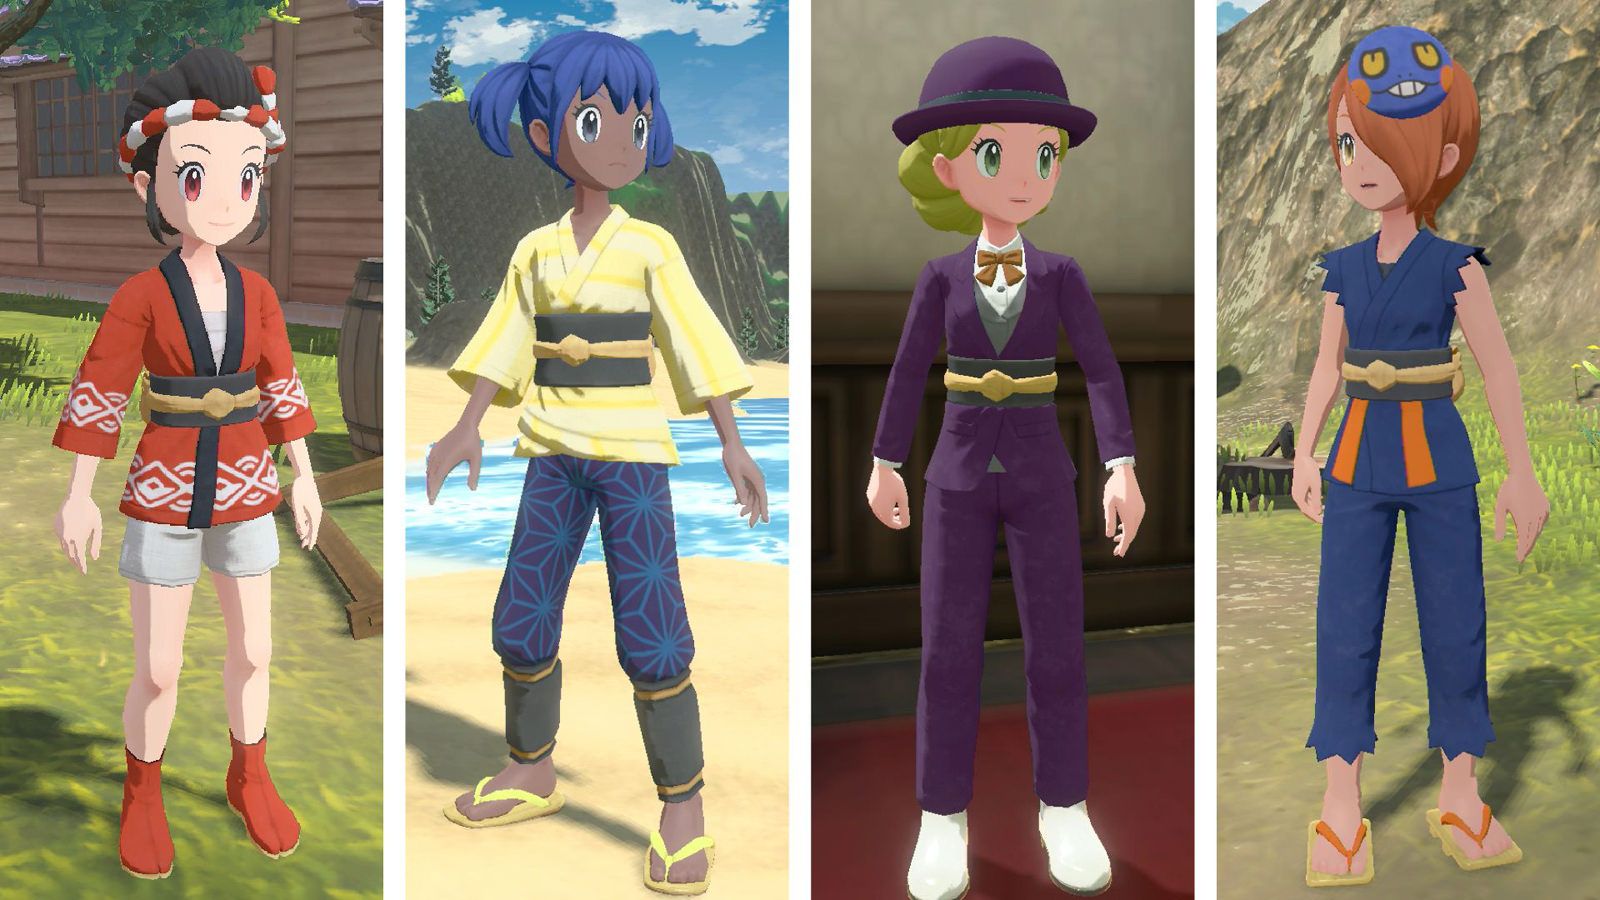 Players can mix and match clothing items in Pokémon Legends: Arceus